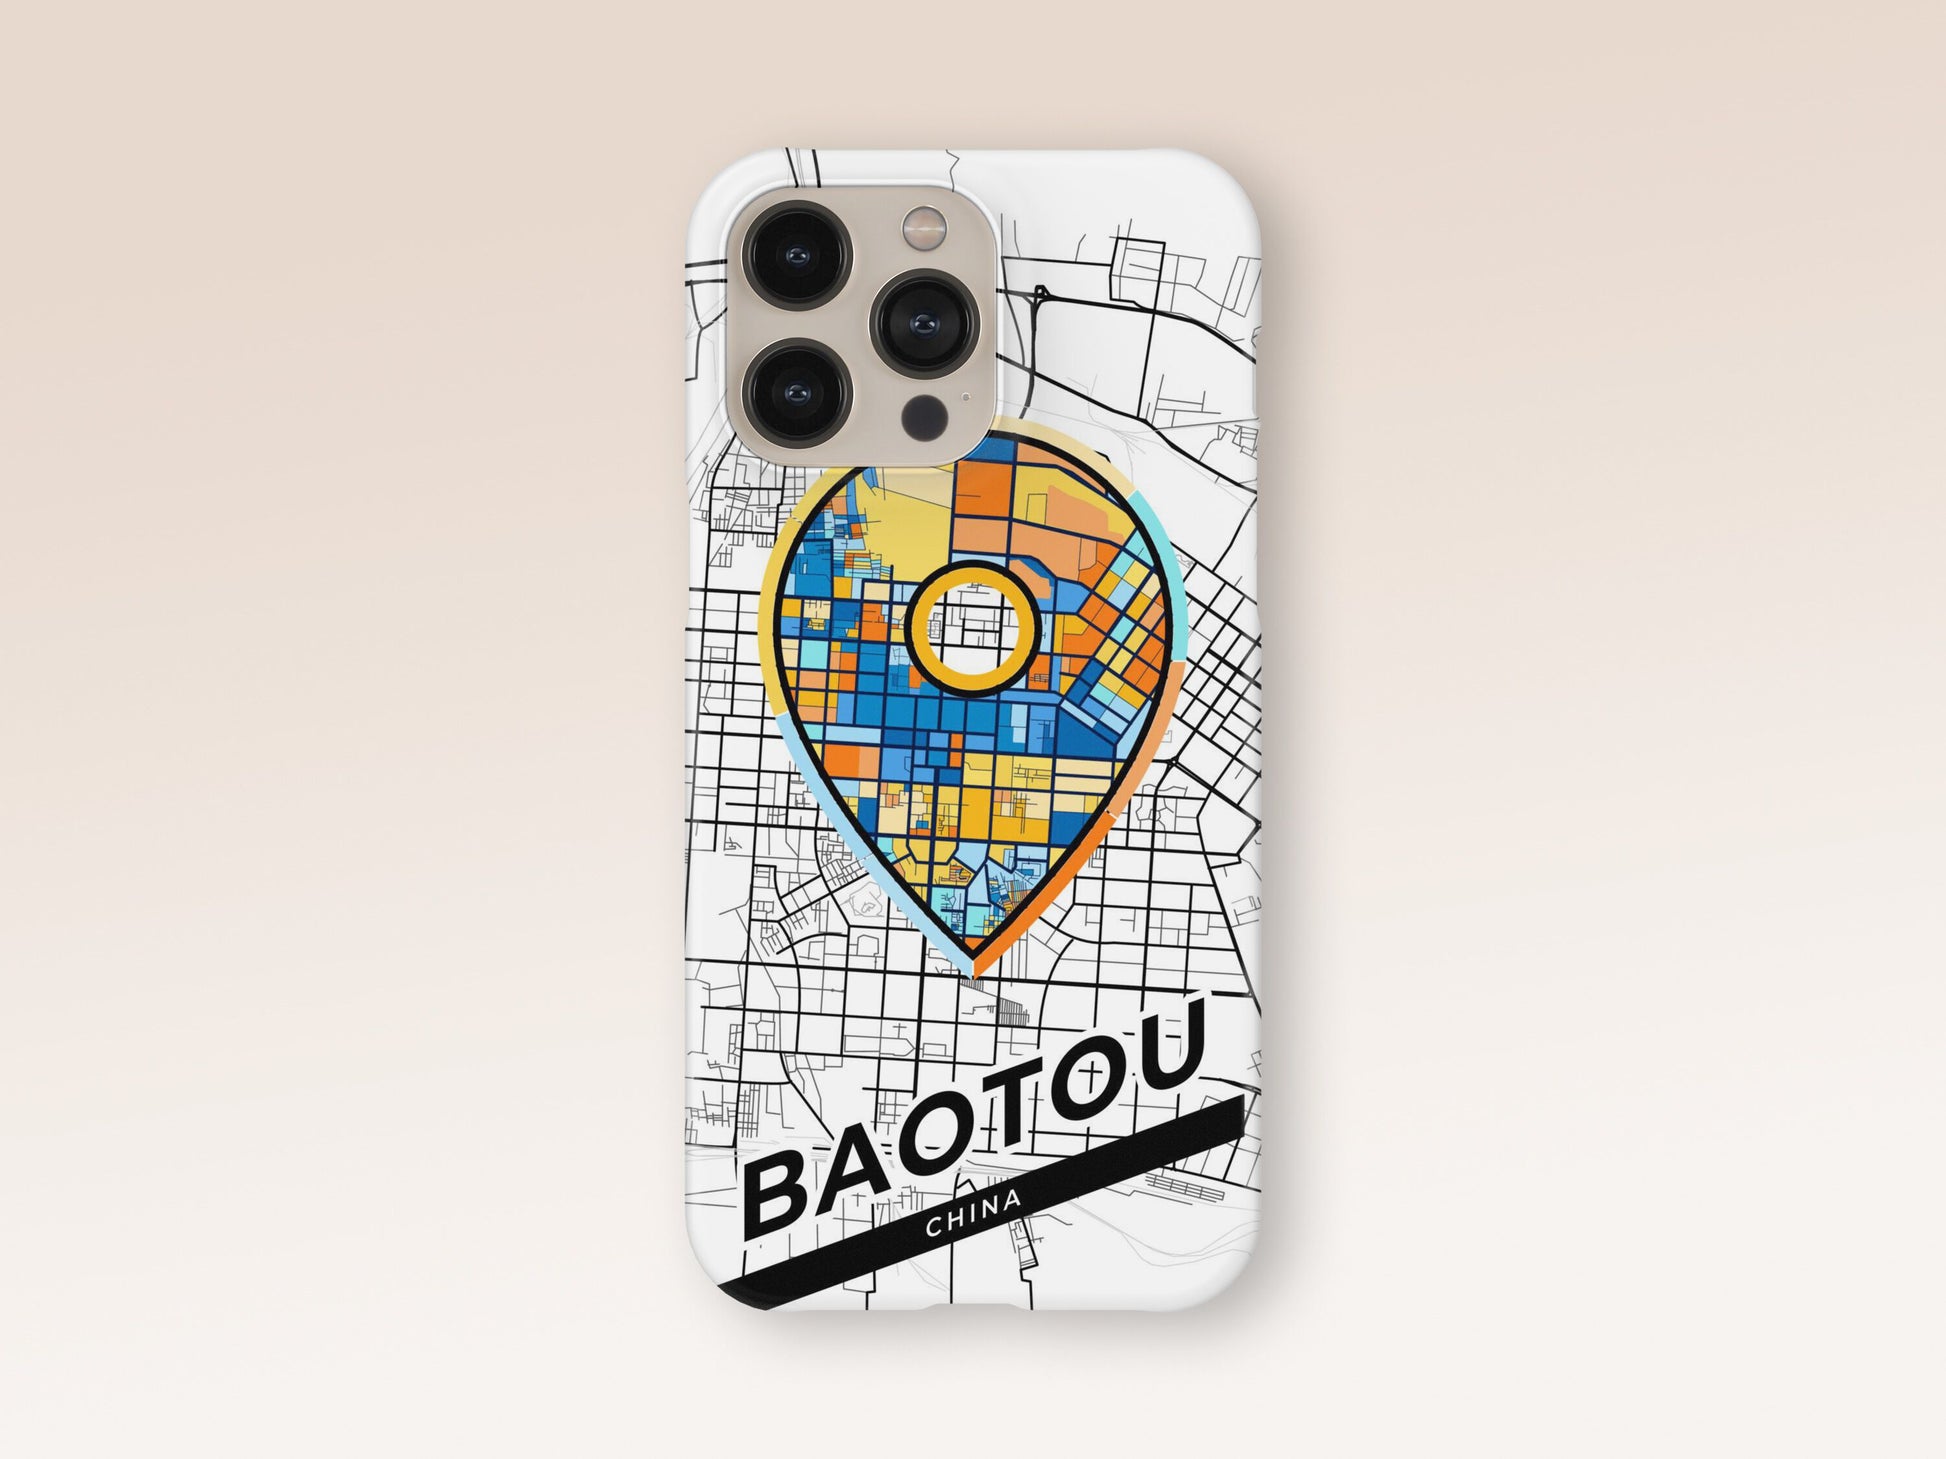 Baotou China slim phone case with colorful icon. Birthday, wedding or housewarming gift. Couple match cases. 1